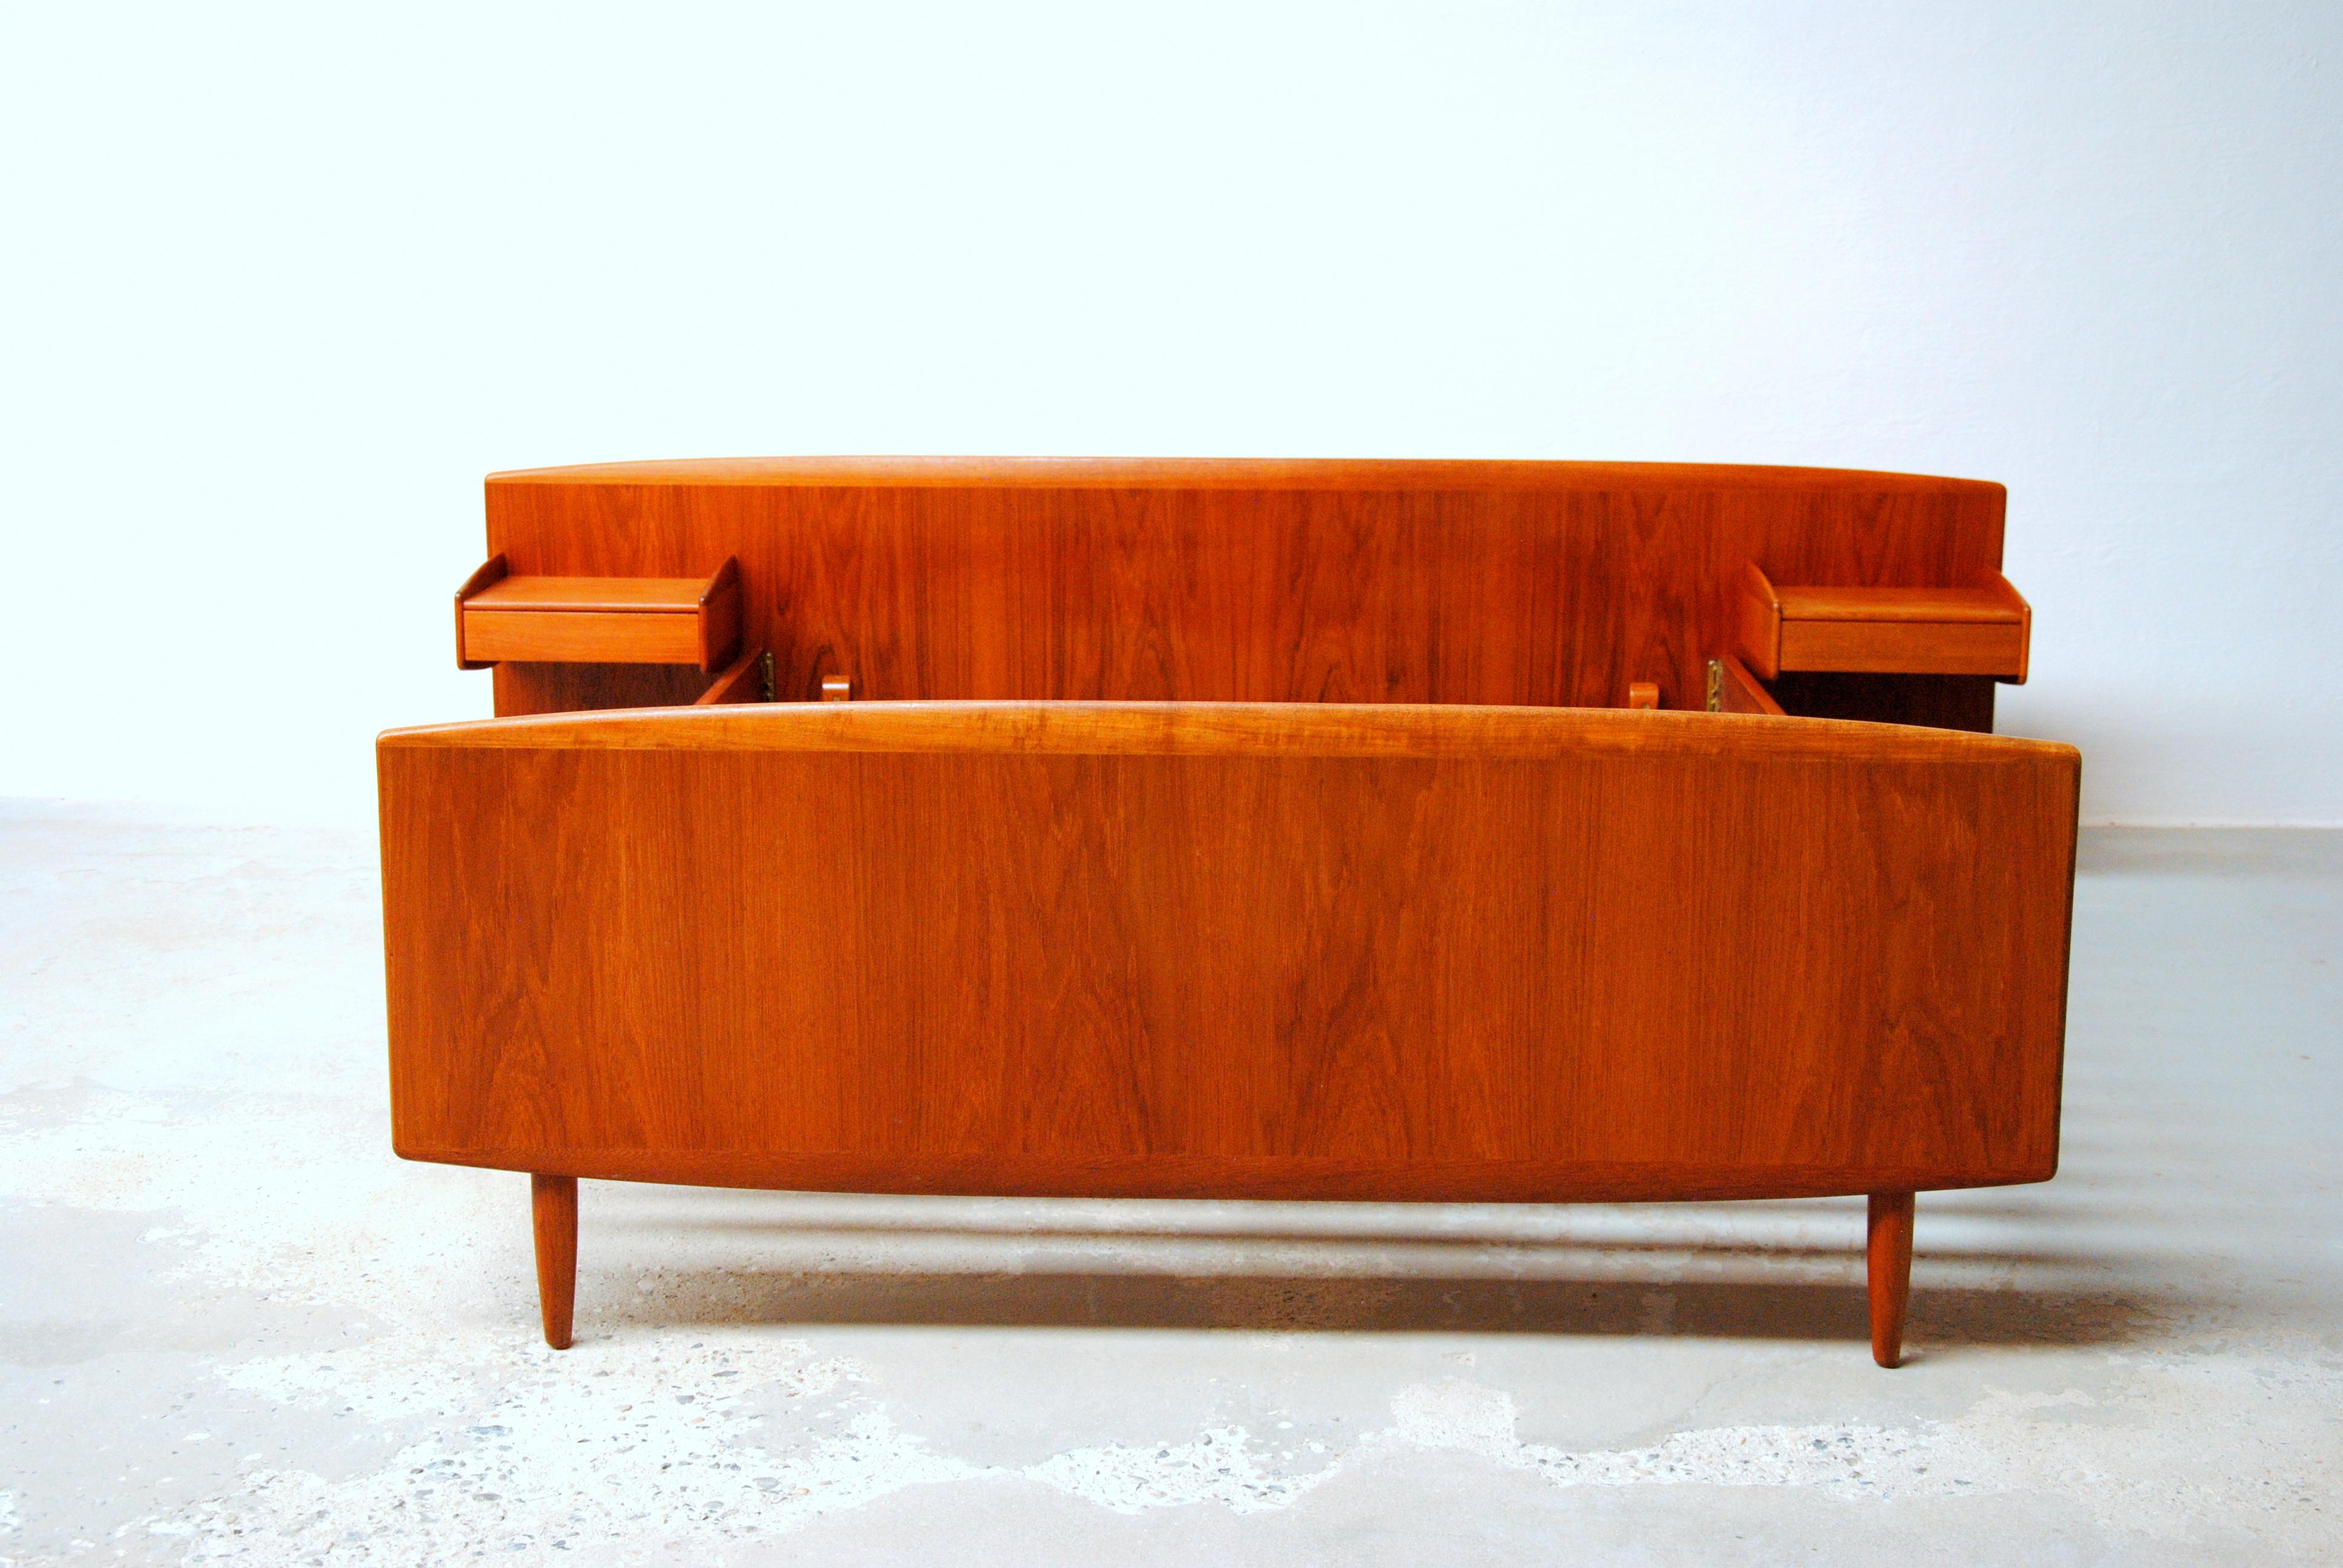 1960's Restored Danish Melvin Mikkelsen teak bed with integrated nightstands.

Rare and unusual fully restored 1960's Melvin Mikkelsen teak bedroom set consisting of 3/4 seized double bed with integrated nightstands in the headboard.

Like most of